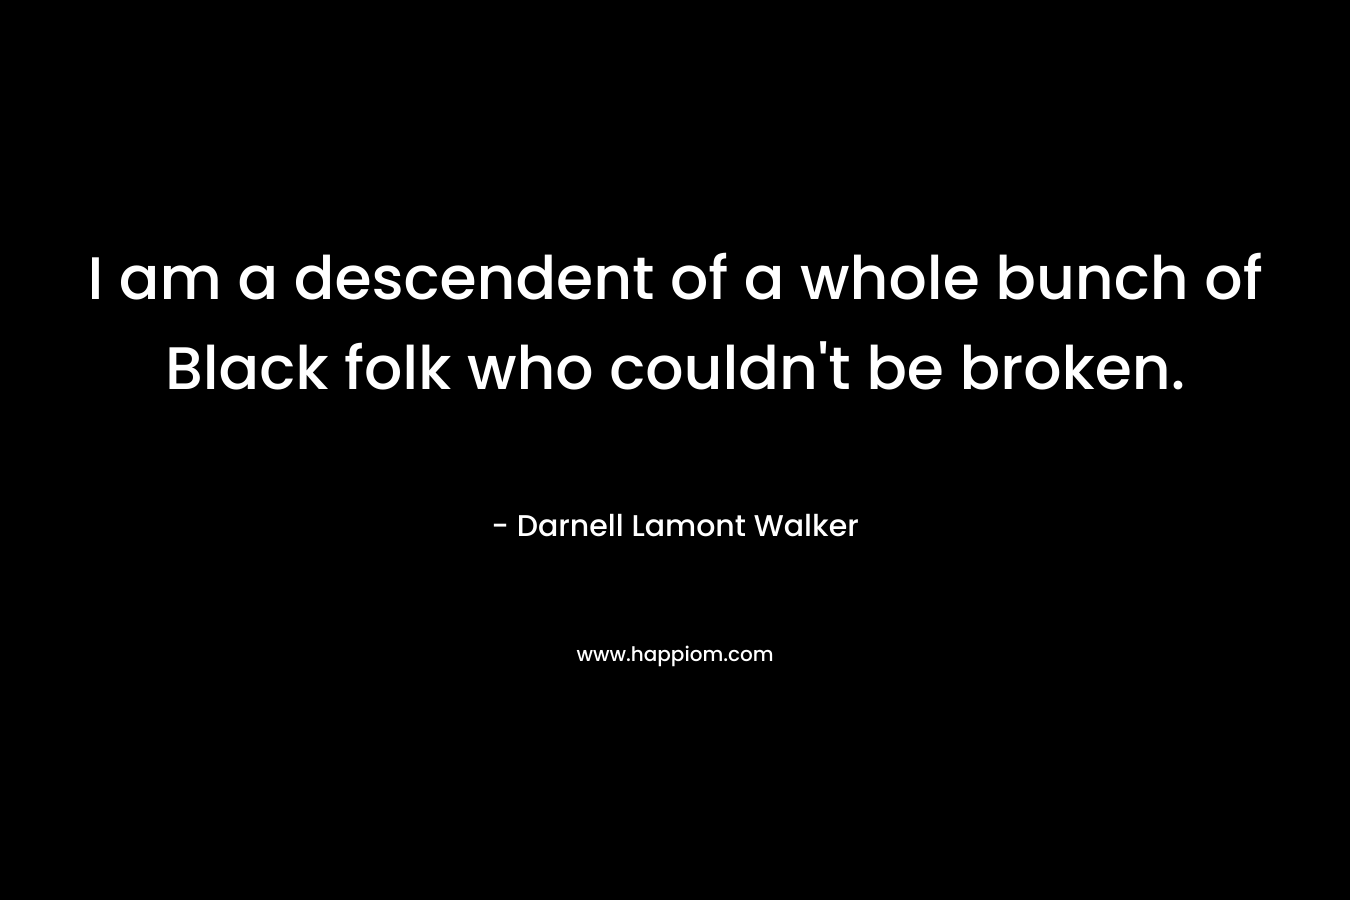 I am a descendent of a whole bunch of Black folk who couldn’t be broken. – Darnell Lamont Walker